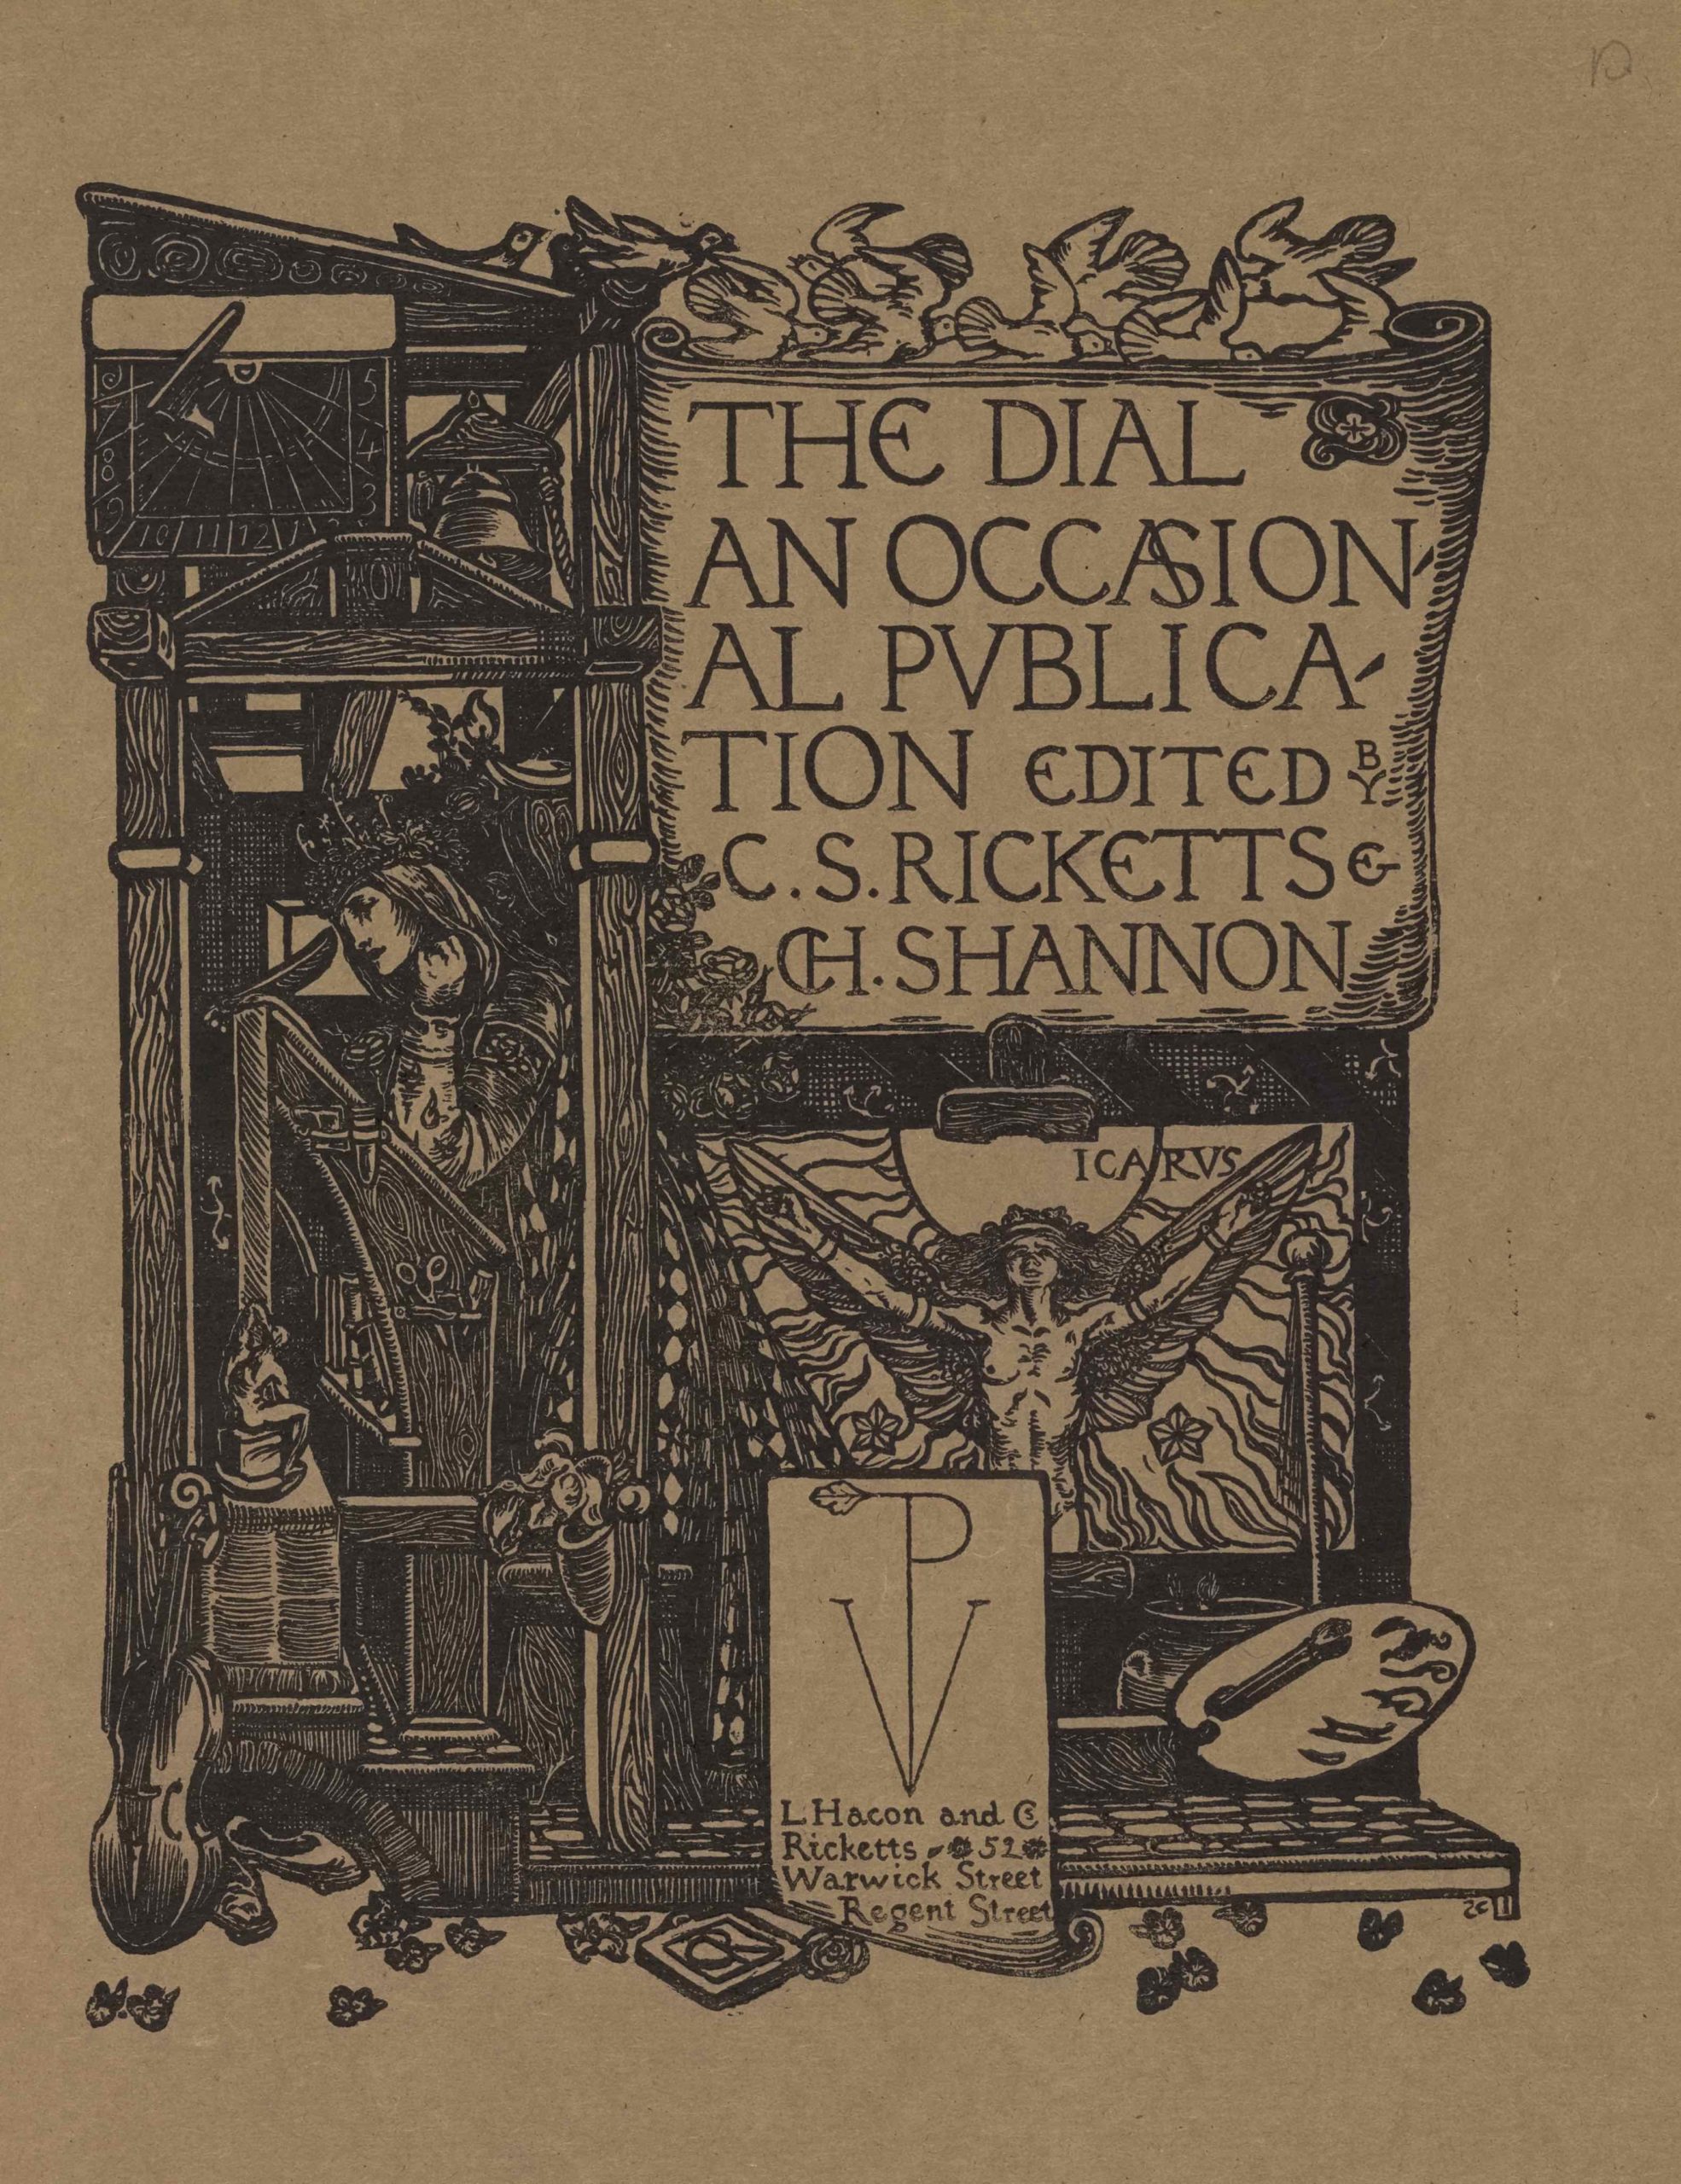 The image is printed in black ink on buff coloured paper. It is centered in portrait orientation on the page. In the upper right region of the image, a large scroll or cartouche displaying the text “The Dial: An Occasional Publication Edited by C.S. Ricketts and CH. Shannon” in large capital letters is positioned on a tall structure made from wooden cross beams. Ten white doves appear to be flying above in both directions to land on the top beam of the structure. Below the large scroll is a sheaf of roses and a labelled image of Icarus, naked , with his arms outstretched beside him to hold up his wings. Icarus is standing in front of the sun and is surrounded by flames and various scattered flowers. A framed box is below the Icarus iconography displaying a stylized monogram of the capital letters “VP.” The “P,” runs down the centre of the “V,” and has a leaf emerging from it on the left. Below the monogram is the publishing information: “L. Hacon and CS Ricketts 52 Warwick Street Regent Street.” The artist’s initials “CR” appear centered below the box, set within a book. To the right of this box is an artist’s palette with one brush and a jar with two sprouting plants. In the upper left portion of the image, a sundial and a bell are displayed underneath the lectern-style roof of the structure on the left side, adjacent with the first two lines of text on the scroll. Below them is an open room built in the confines of the wooden cross beams. A woman with a crowned headpiece, long hair, and an ornamented robe, is standing in left profile in the open room. She appears to be leaning against a tall writing desk/prayer stand/ art desk, which is also depicted in profile. The woman’s left arm is bent and rested on the desk and raised beneath her chin. Her right arm is rested up against the desk and she appears to be holding a quill pen with her right hand. The side of the desk contains artisanal instruments such as scissors and engravers. A small grotesque supports one of the legs of the desk at left. Below this pedestal is leaning a violin and a pair of slippers. Scattered across the whole bottom border of the image are leaves or flower petals.